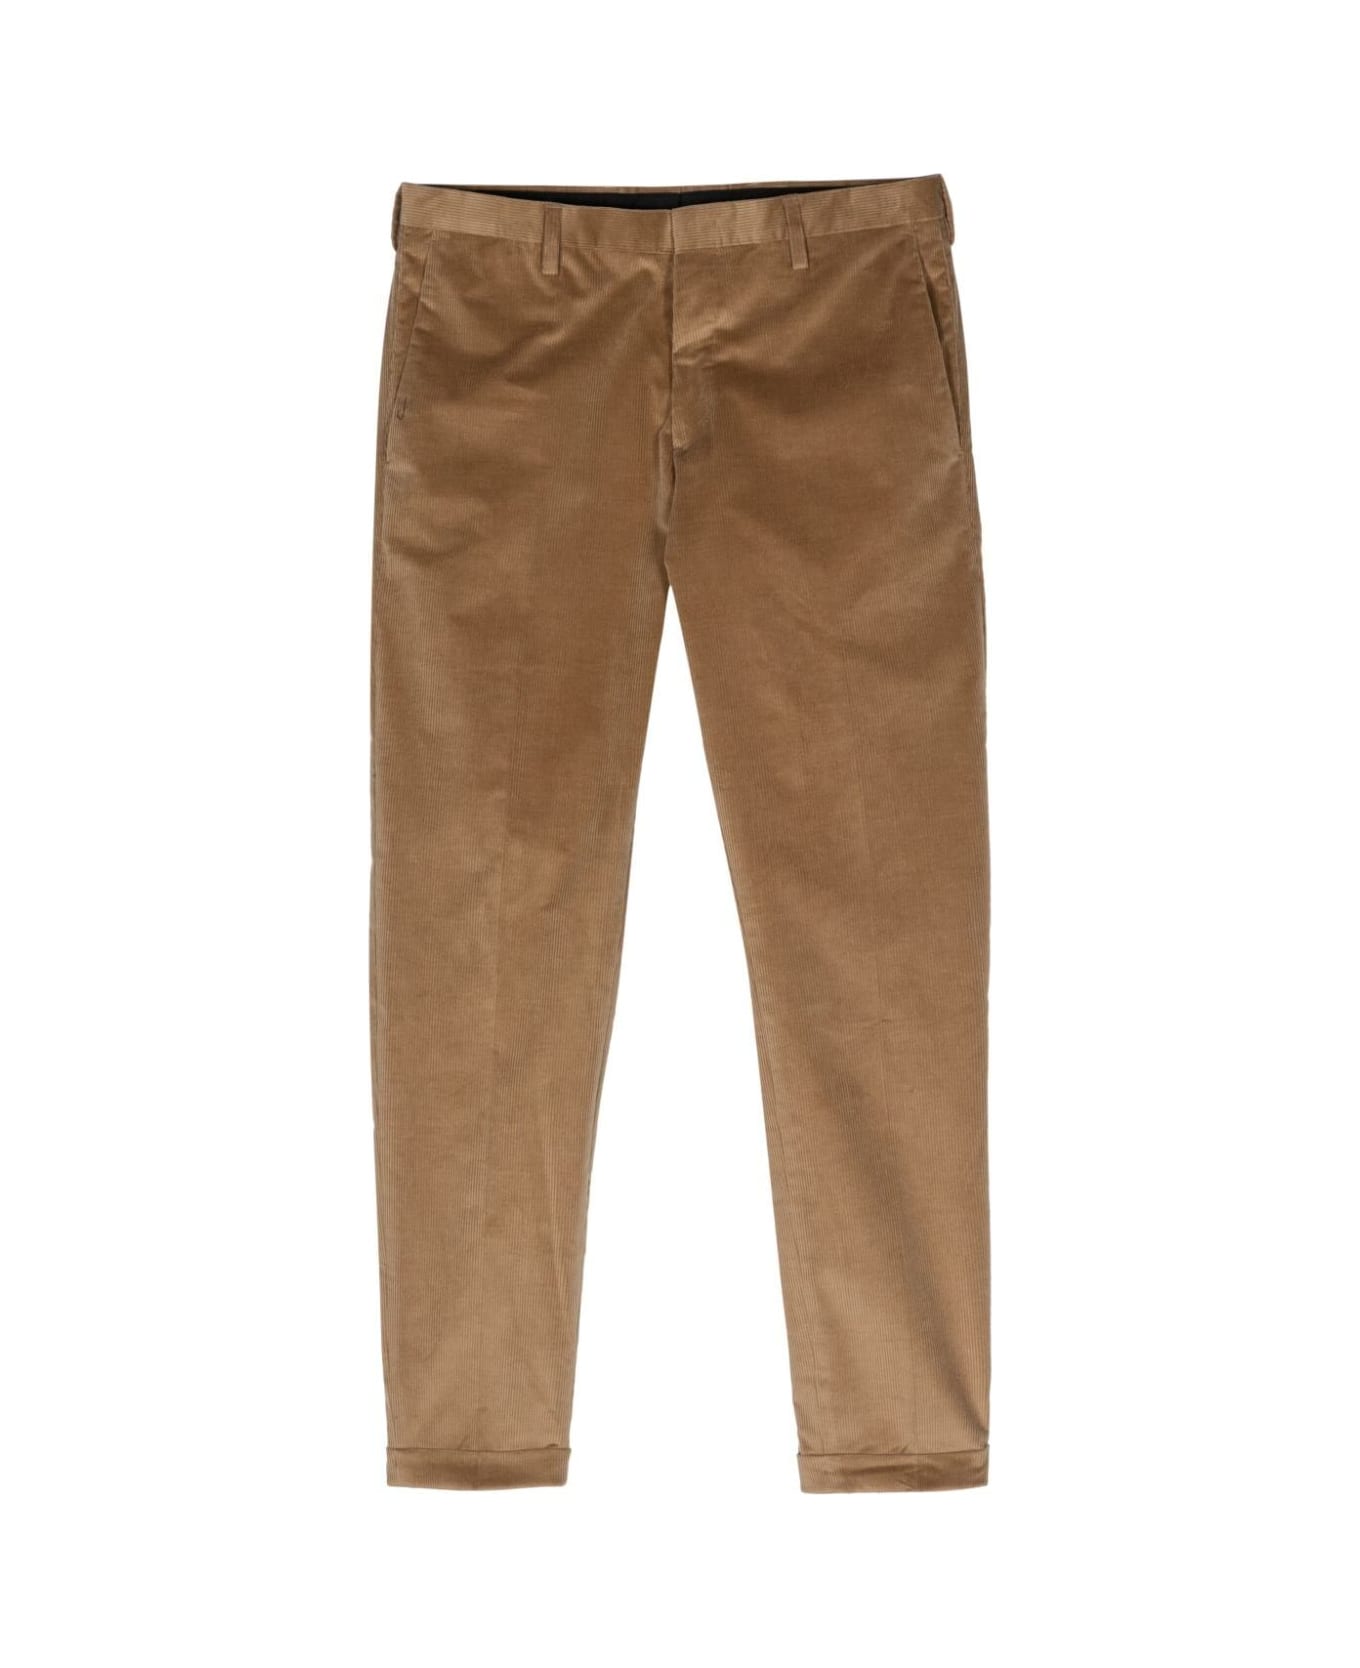 Paul Smith Mens Trousers - Me Be